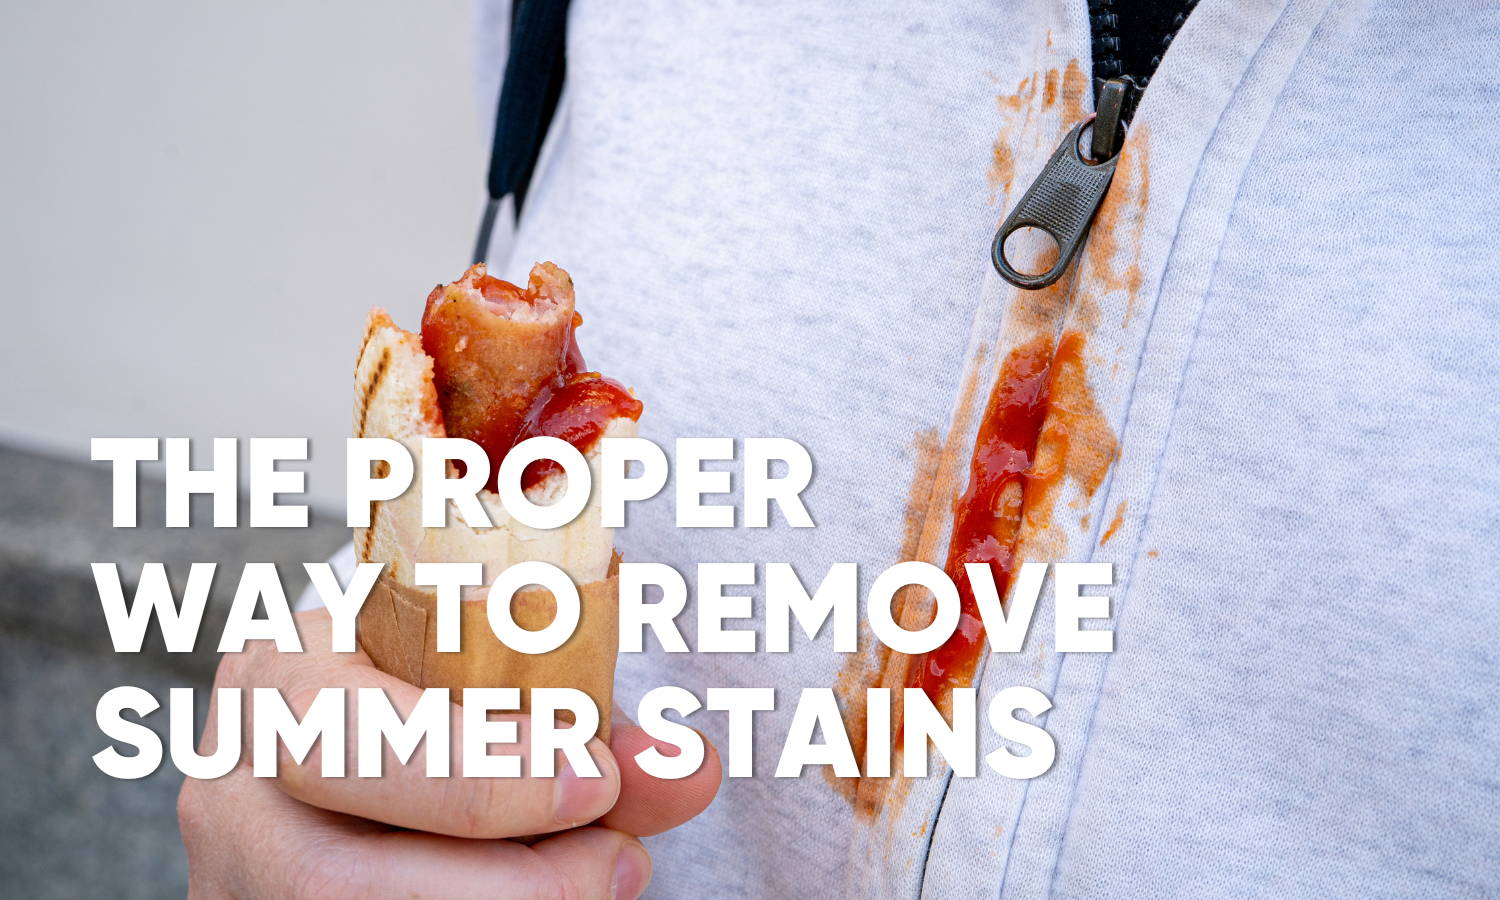 How to Remove Grass, Dirt, Clay, BBQ Sauce, and Other Summer Stains